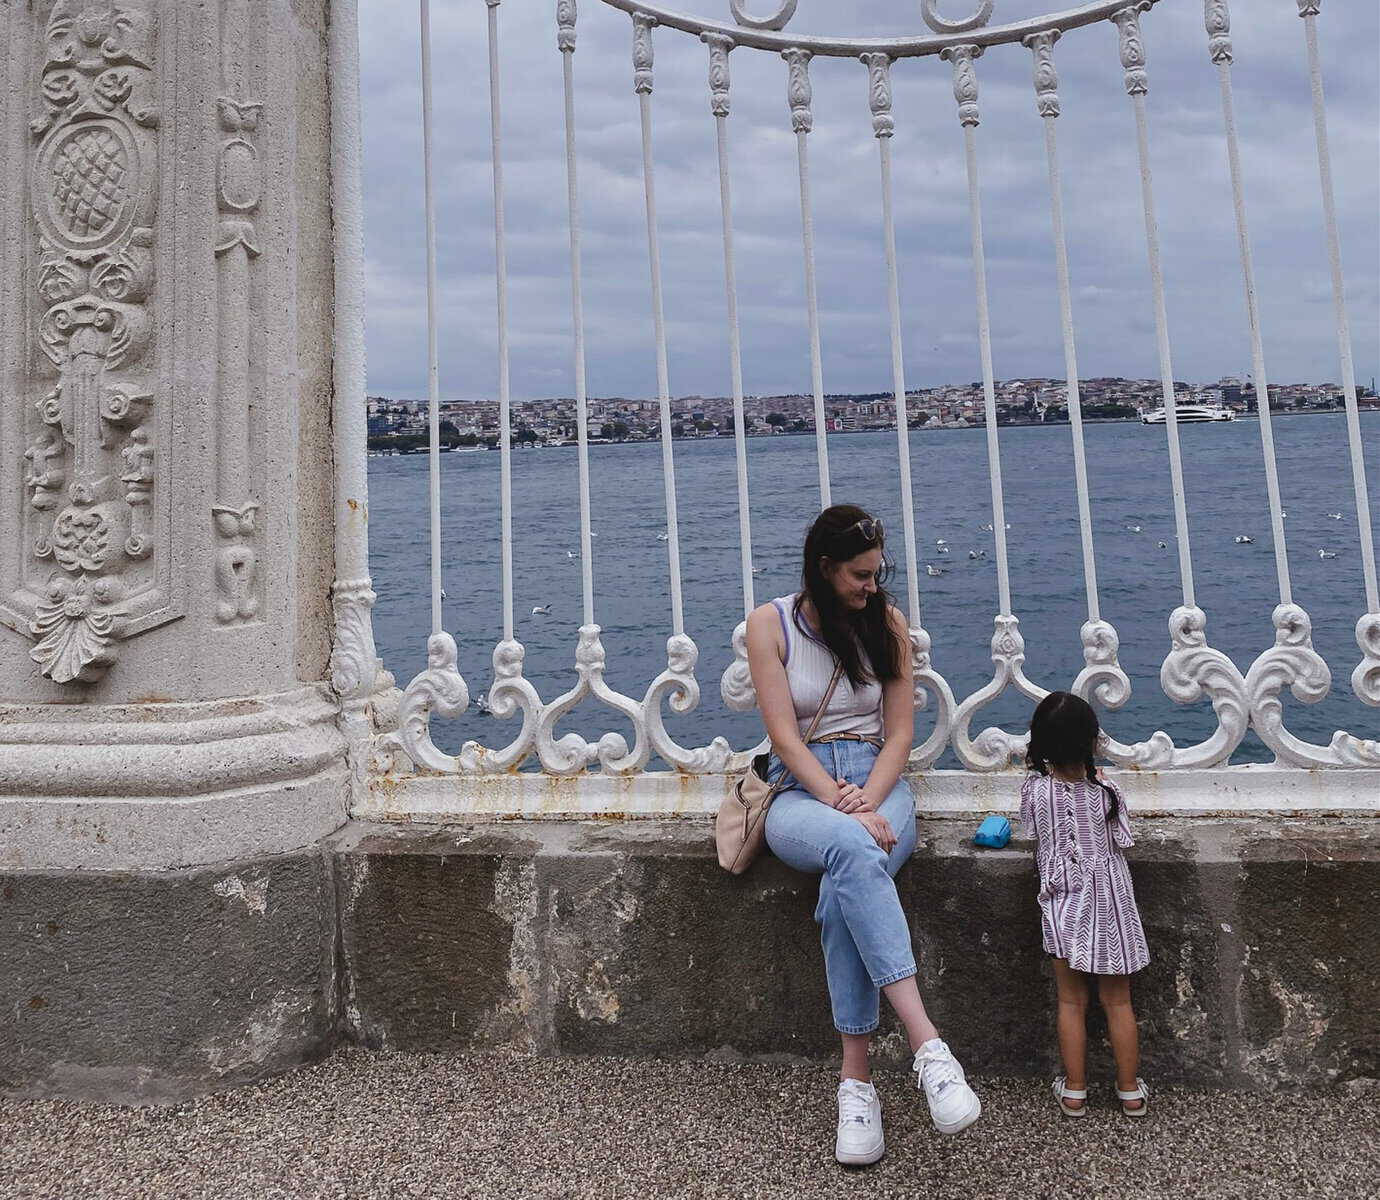 Is Istanbul stroller friendly? Amanda and her daughter sit on a fence with the sea behind them